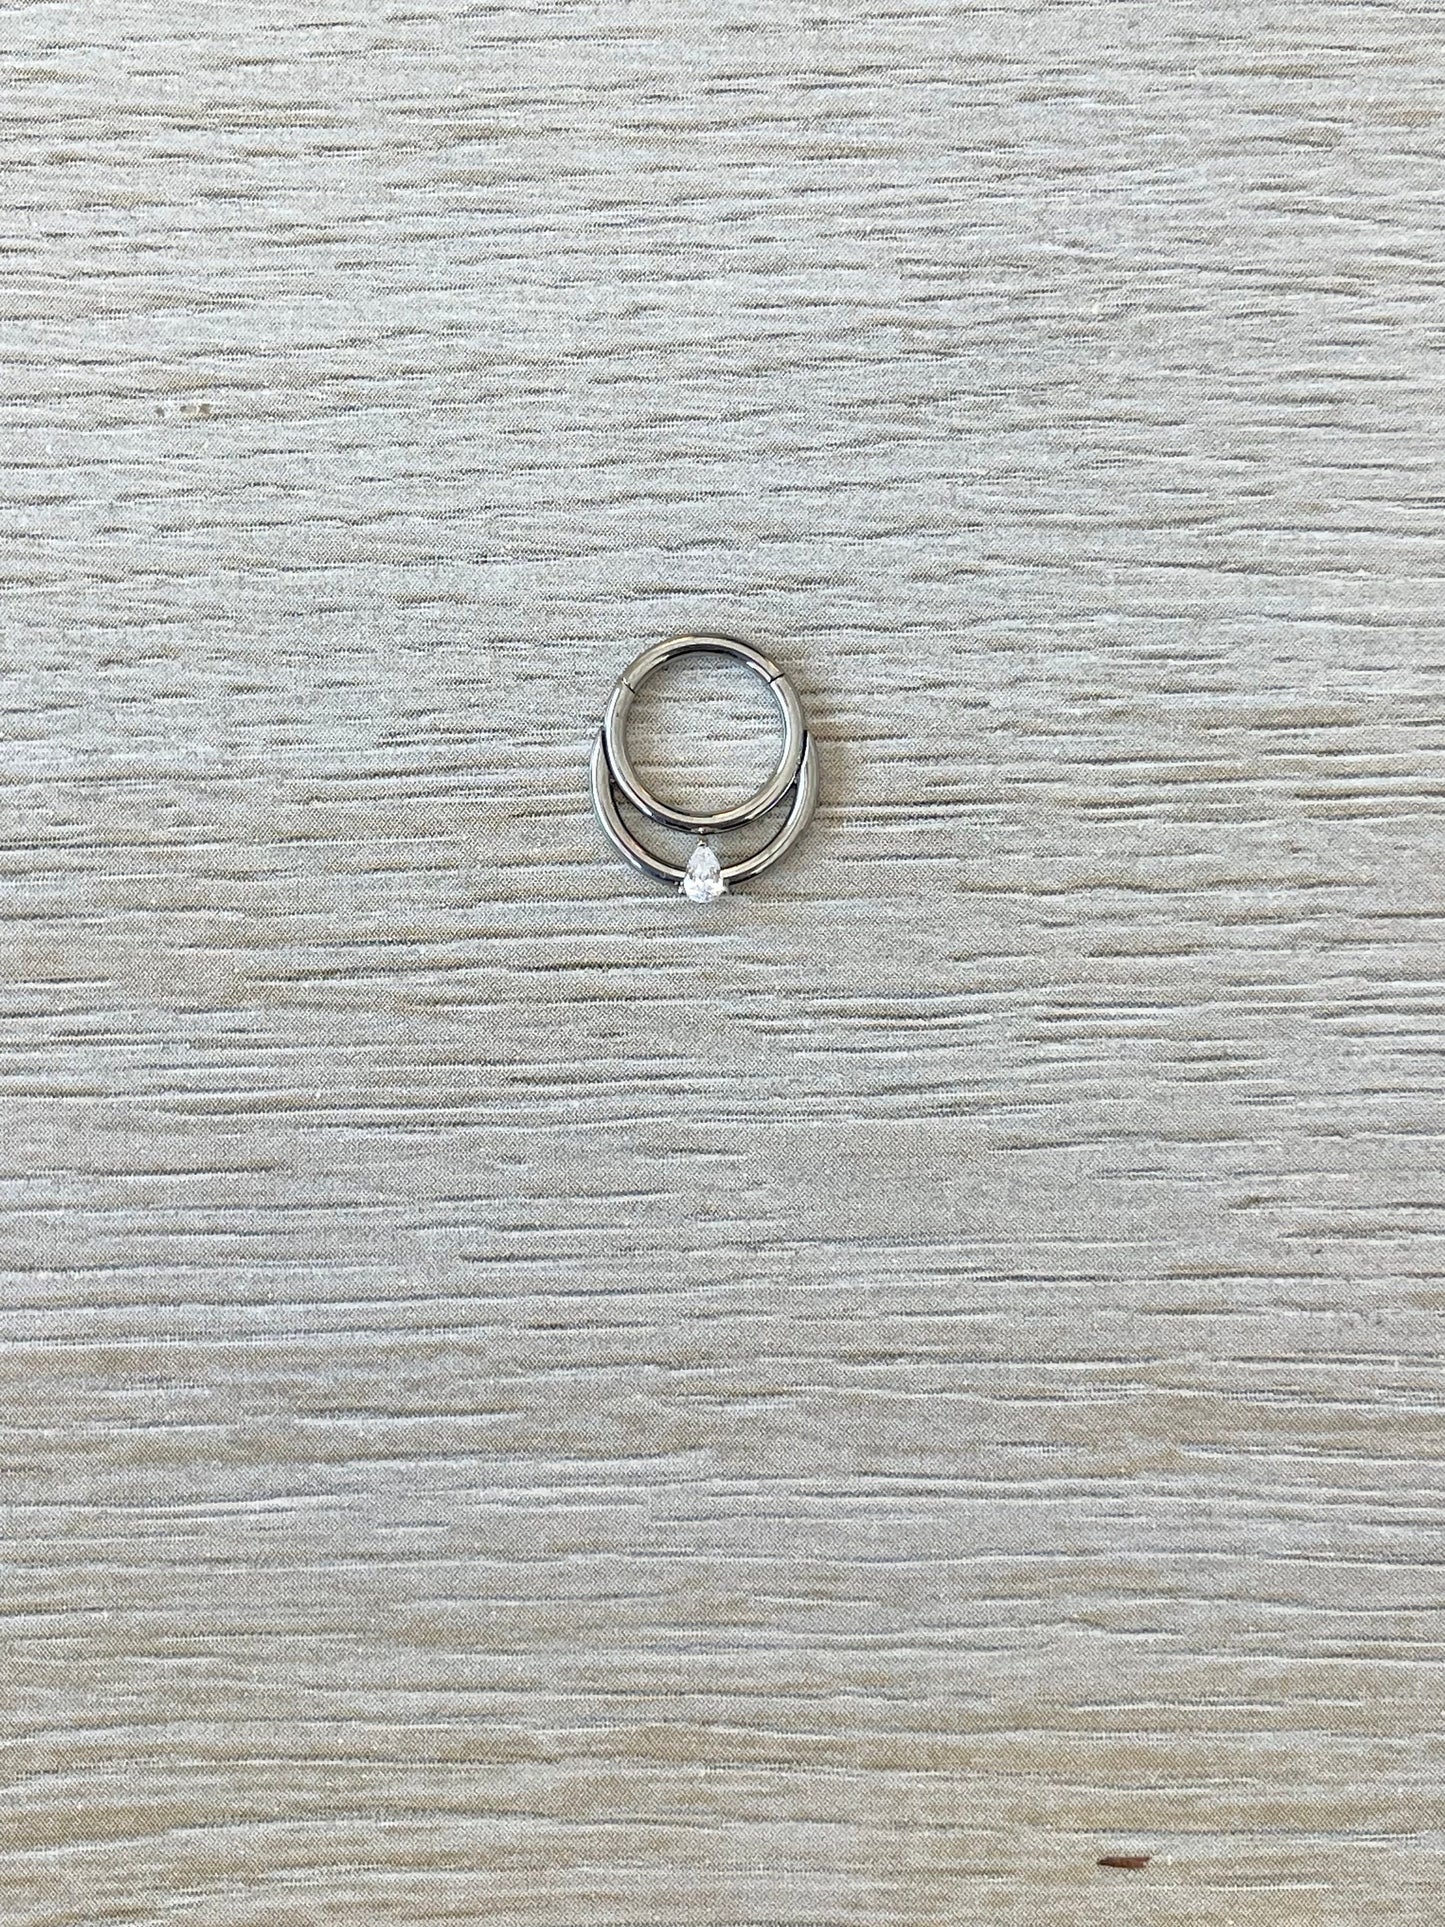 Silver Double Hoop Titanium Septum Ring (16G, 8mm or 10mm)